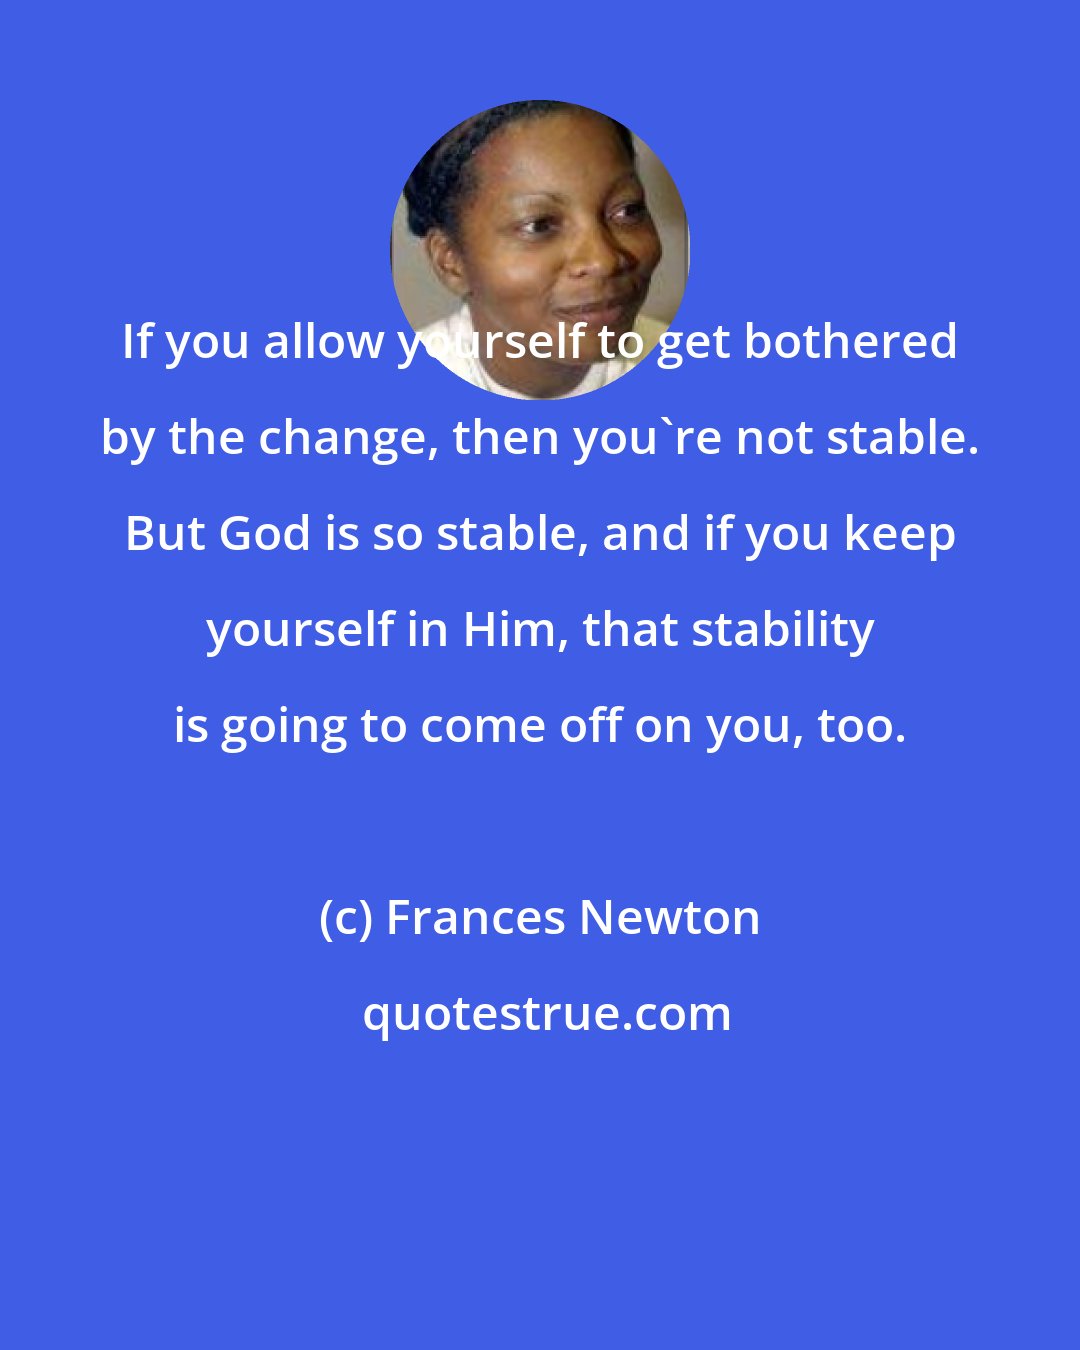 Frances Newton: If you allow yourself to get bothered by the change, then you're not stable. But God is so stable, and if you keep yourself in Him, that stability is going to come off on you, too.